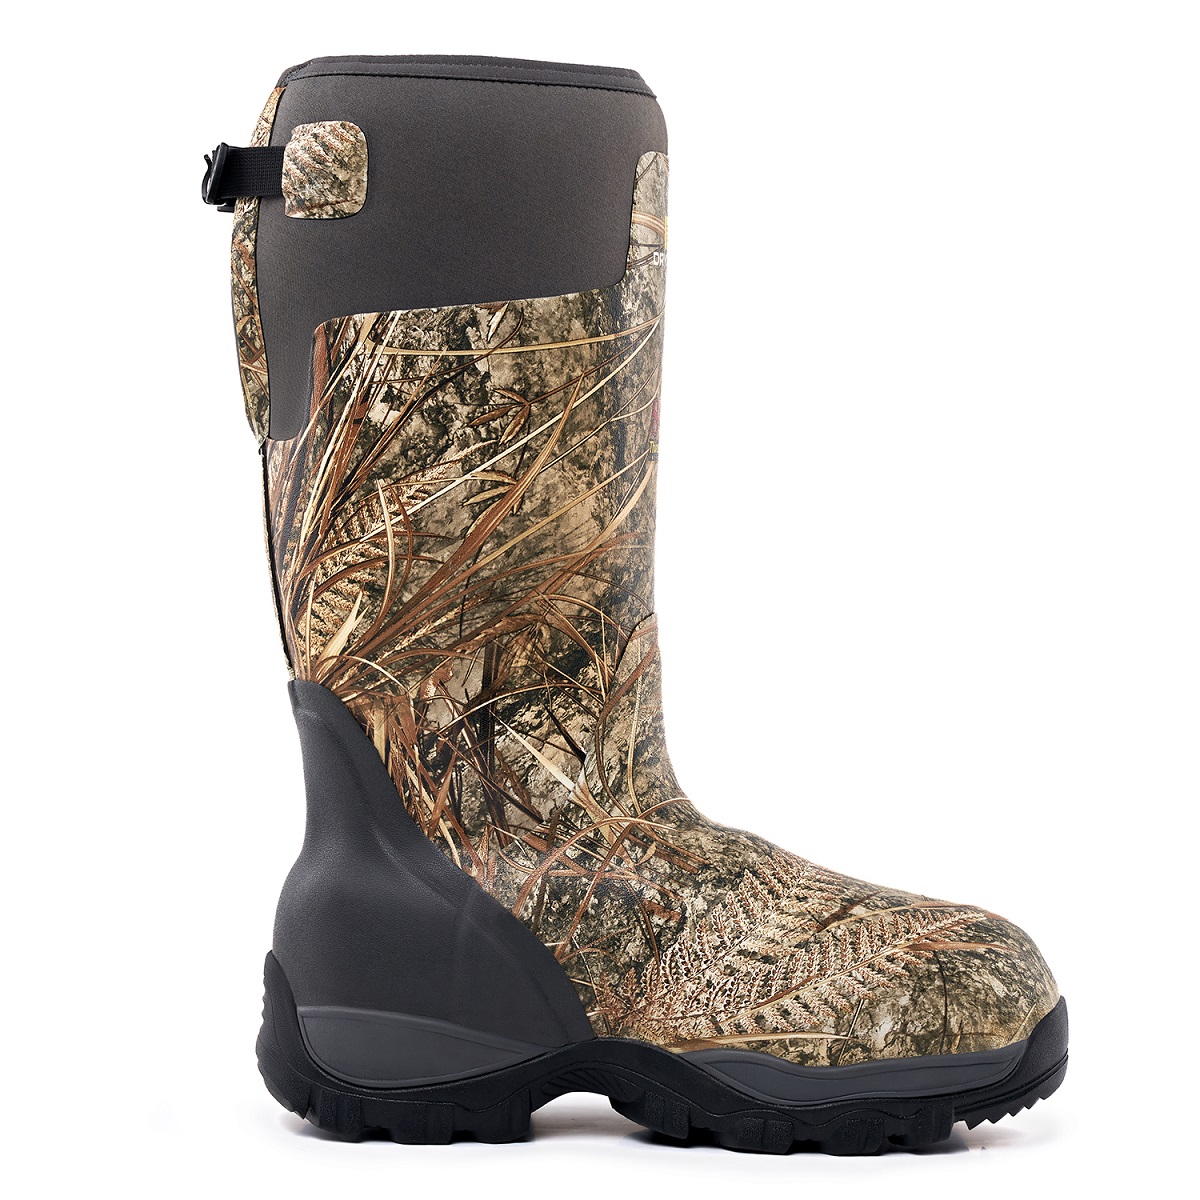  Hunting Boots for Men's and Women's Black Genuine